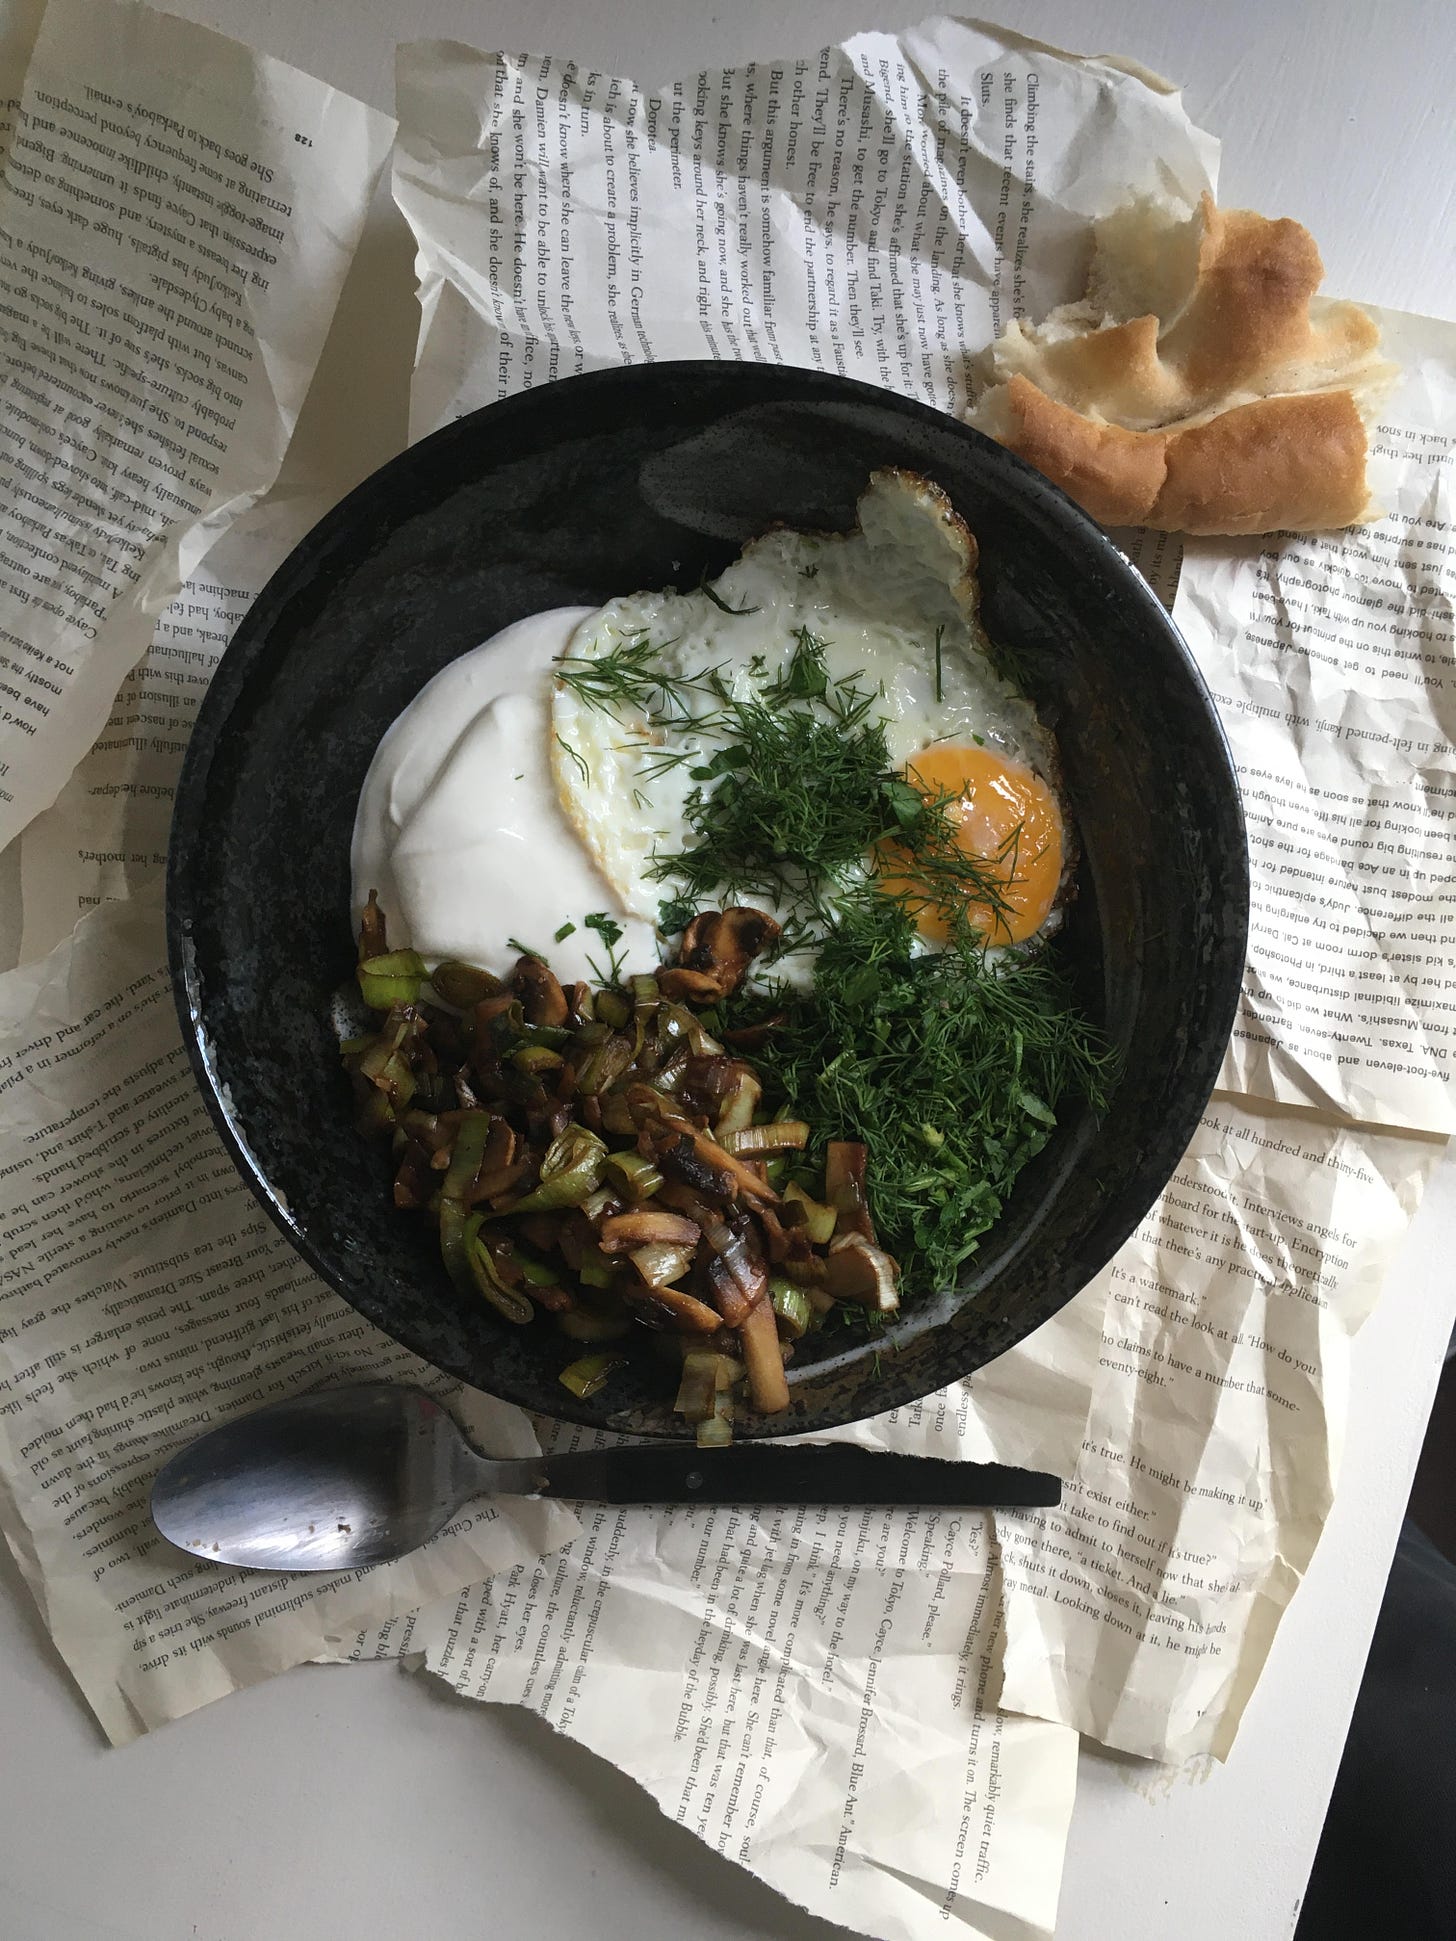 A black bowl with a fried egg, some herbs scattered over, chopped fried leeks and mushrooms, some sour cream. On the table around it, a spoon, a hunk of bread, and scattered pages torn from a book. 